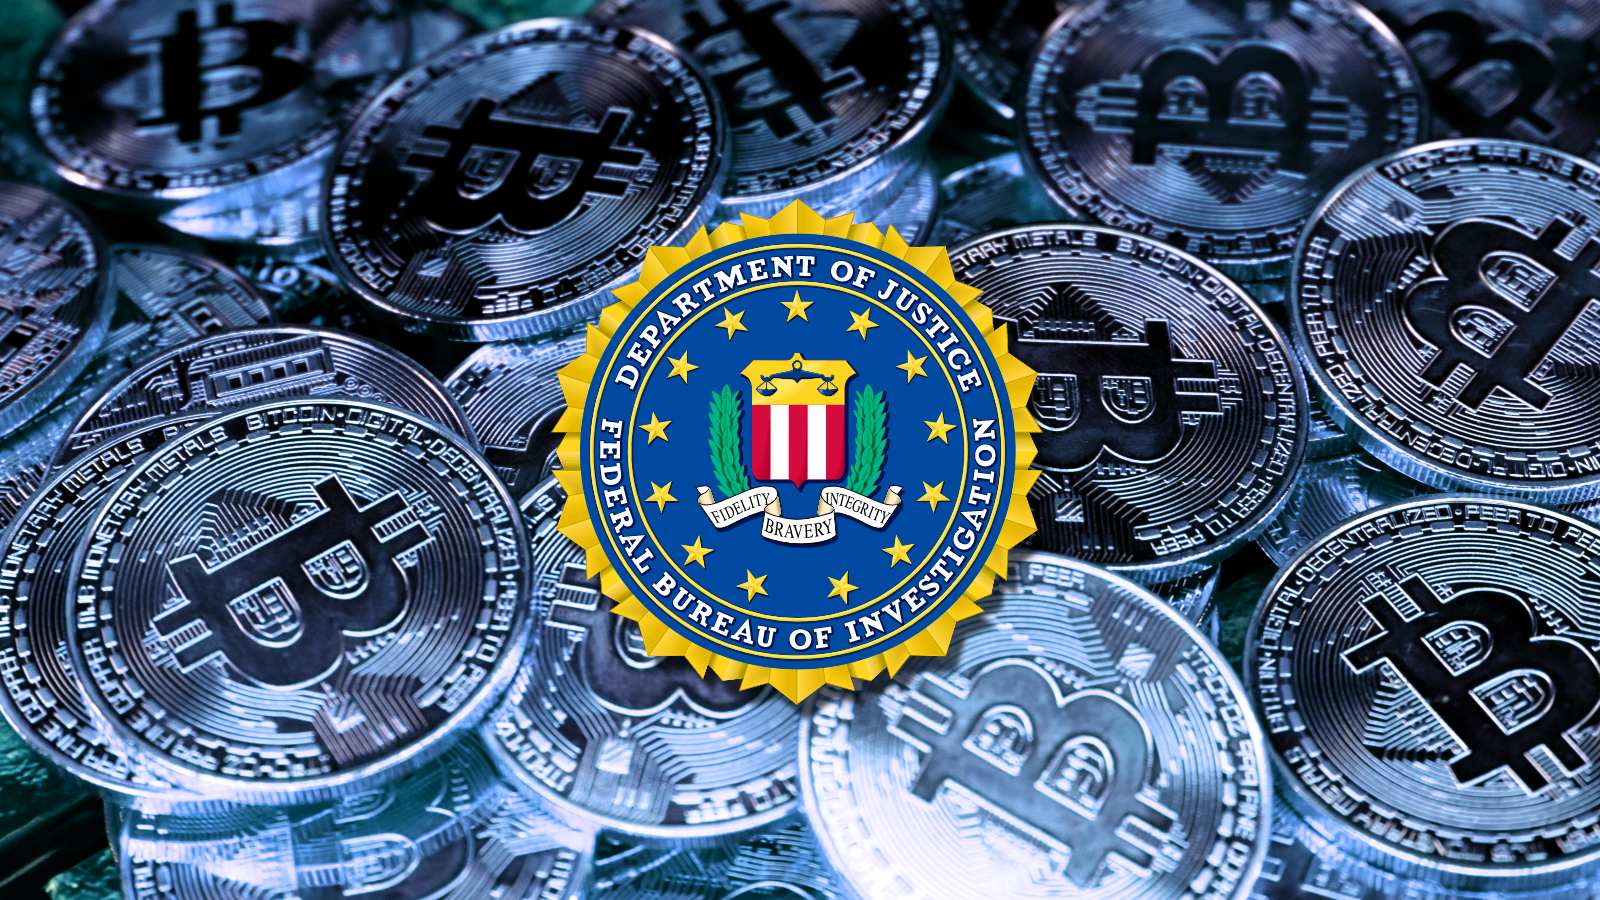 Federal Bureau of Investigation (FBI) said that hackers are abusing weaknesses in the smart contracts that govern decentralized finance (DeFi) networks.